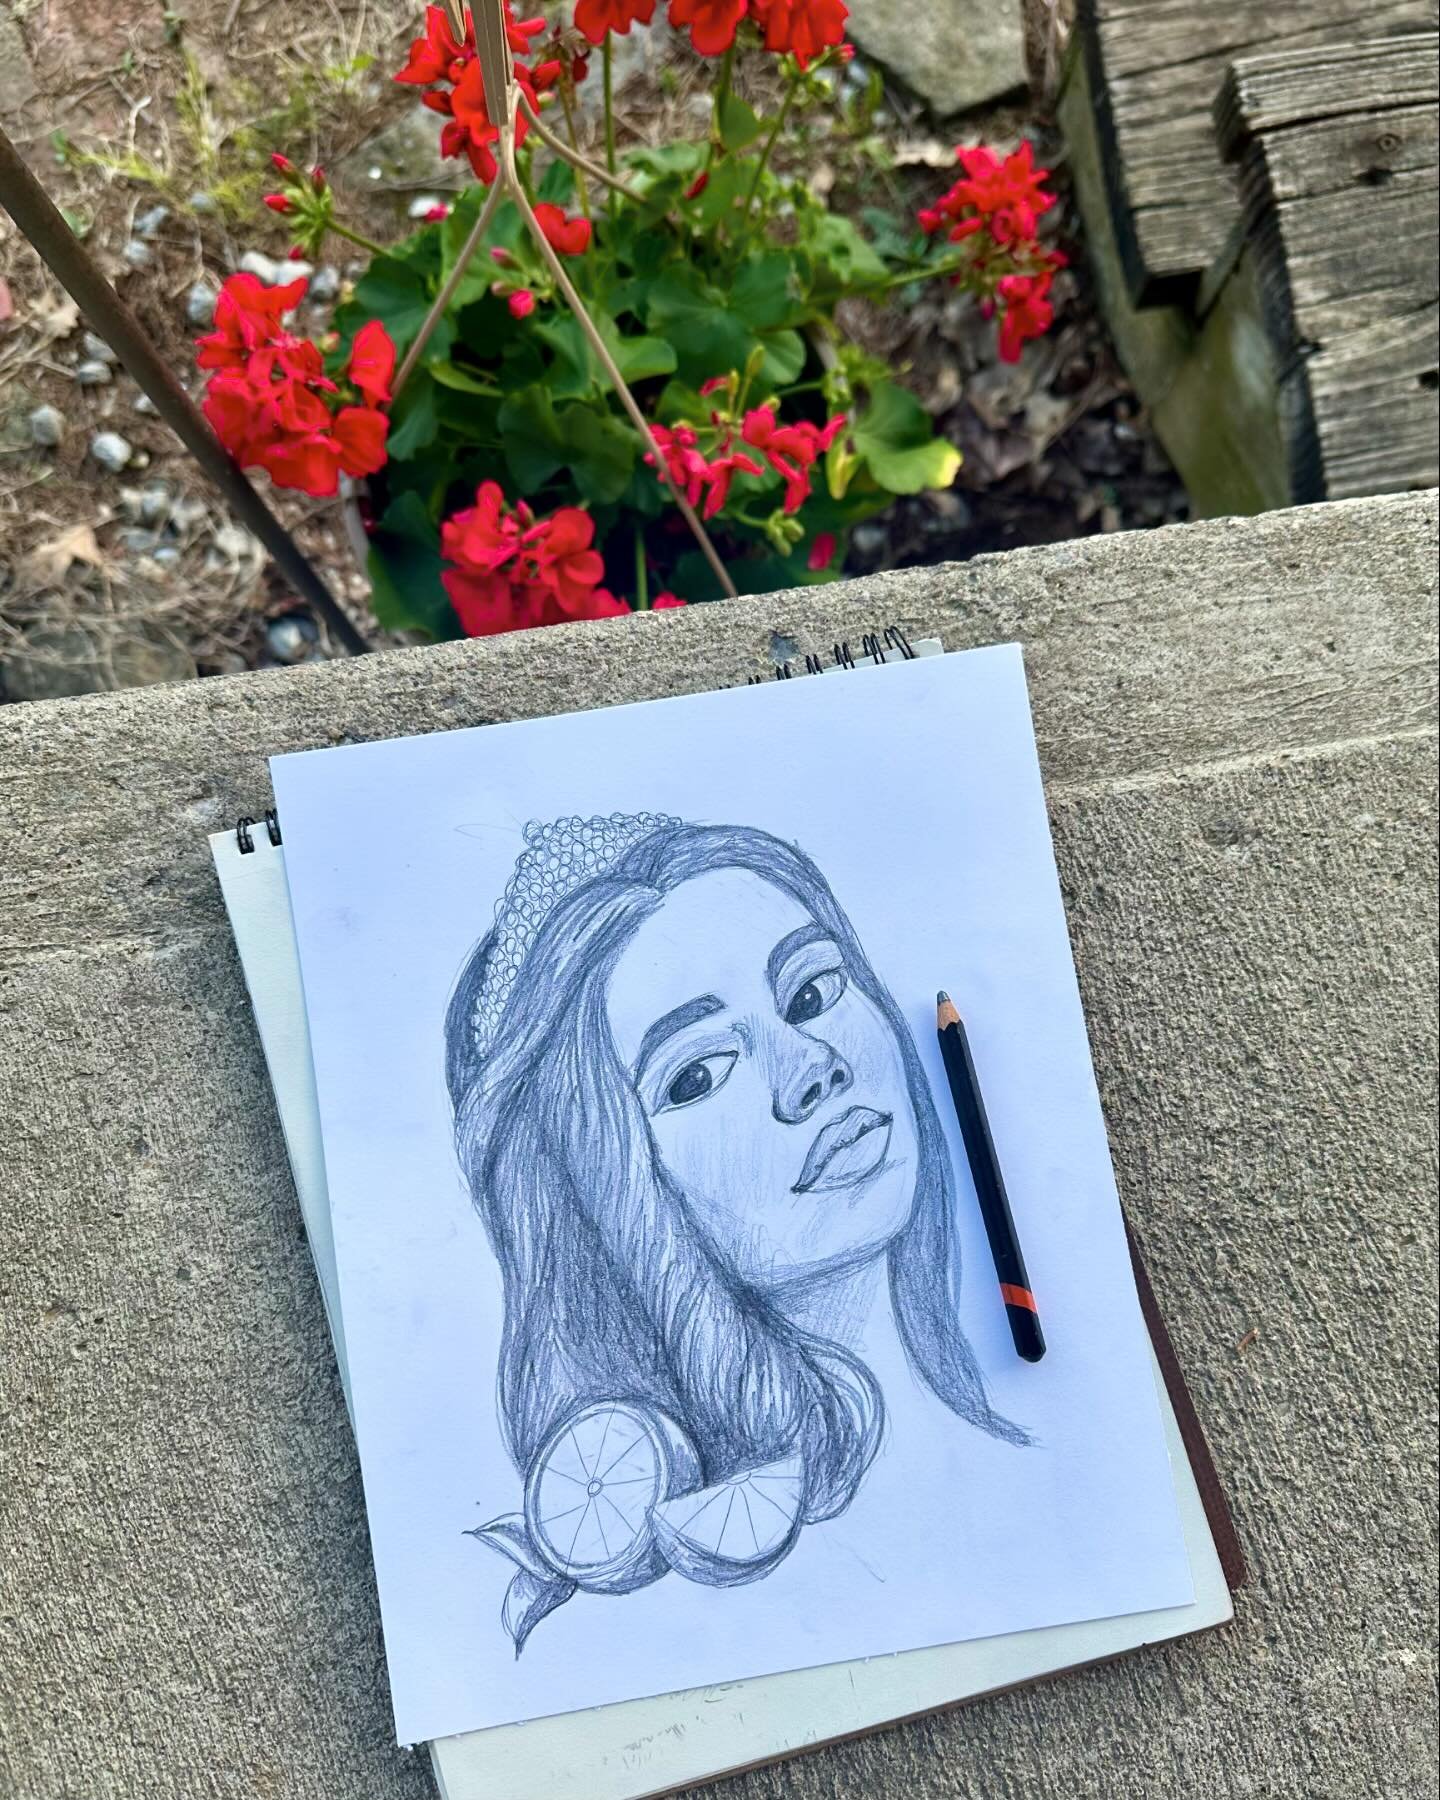 It&rsquo;s a beautiful day so I&rsquo;m drawing outside this evening with Nova and my new flowers 🌺 #ohioartist #portraitart #fruitofthespirit #christianart #christianartist